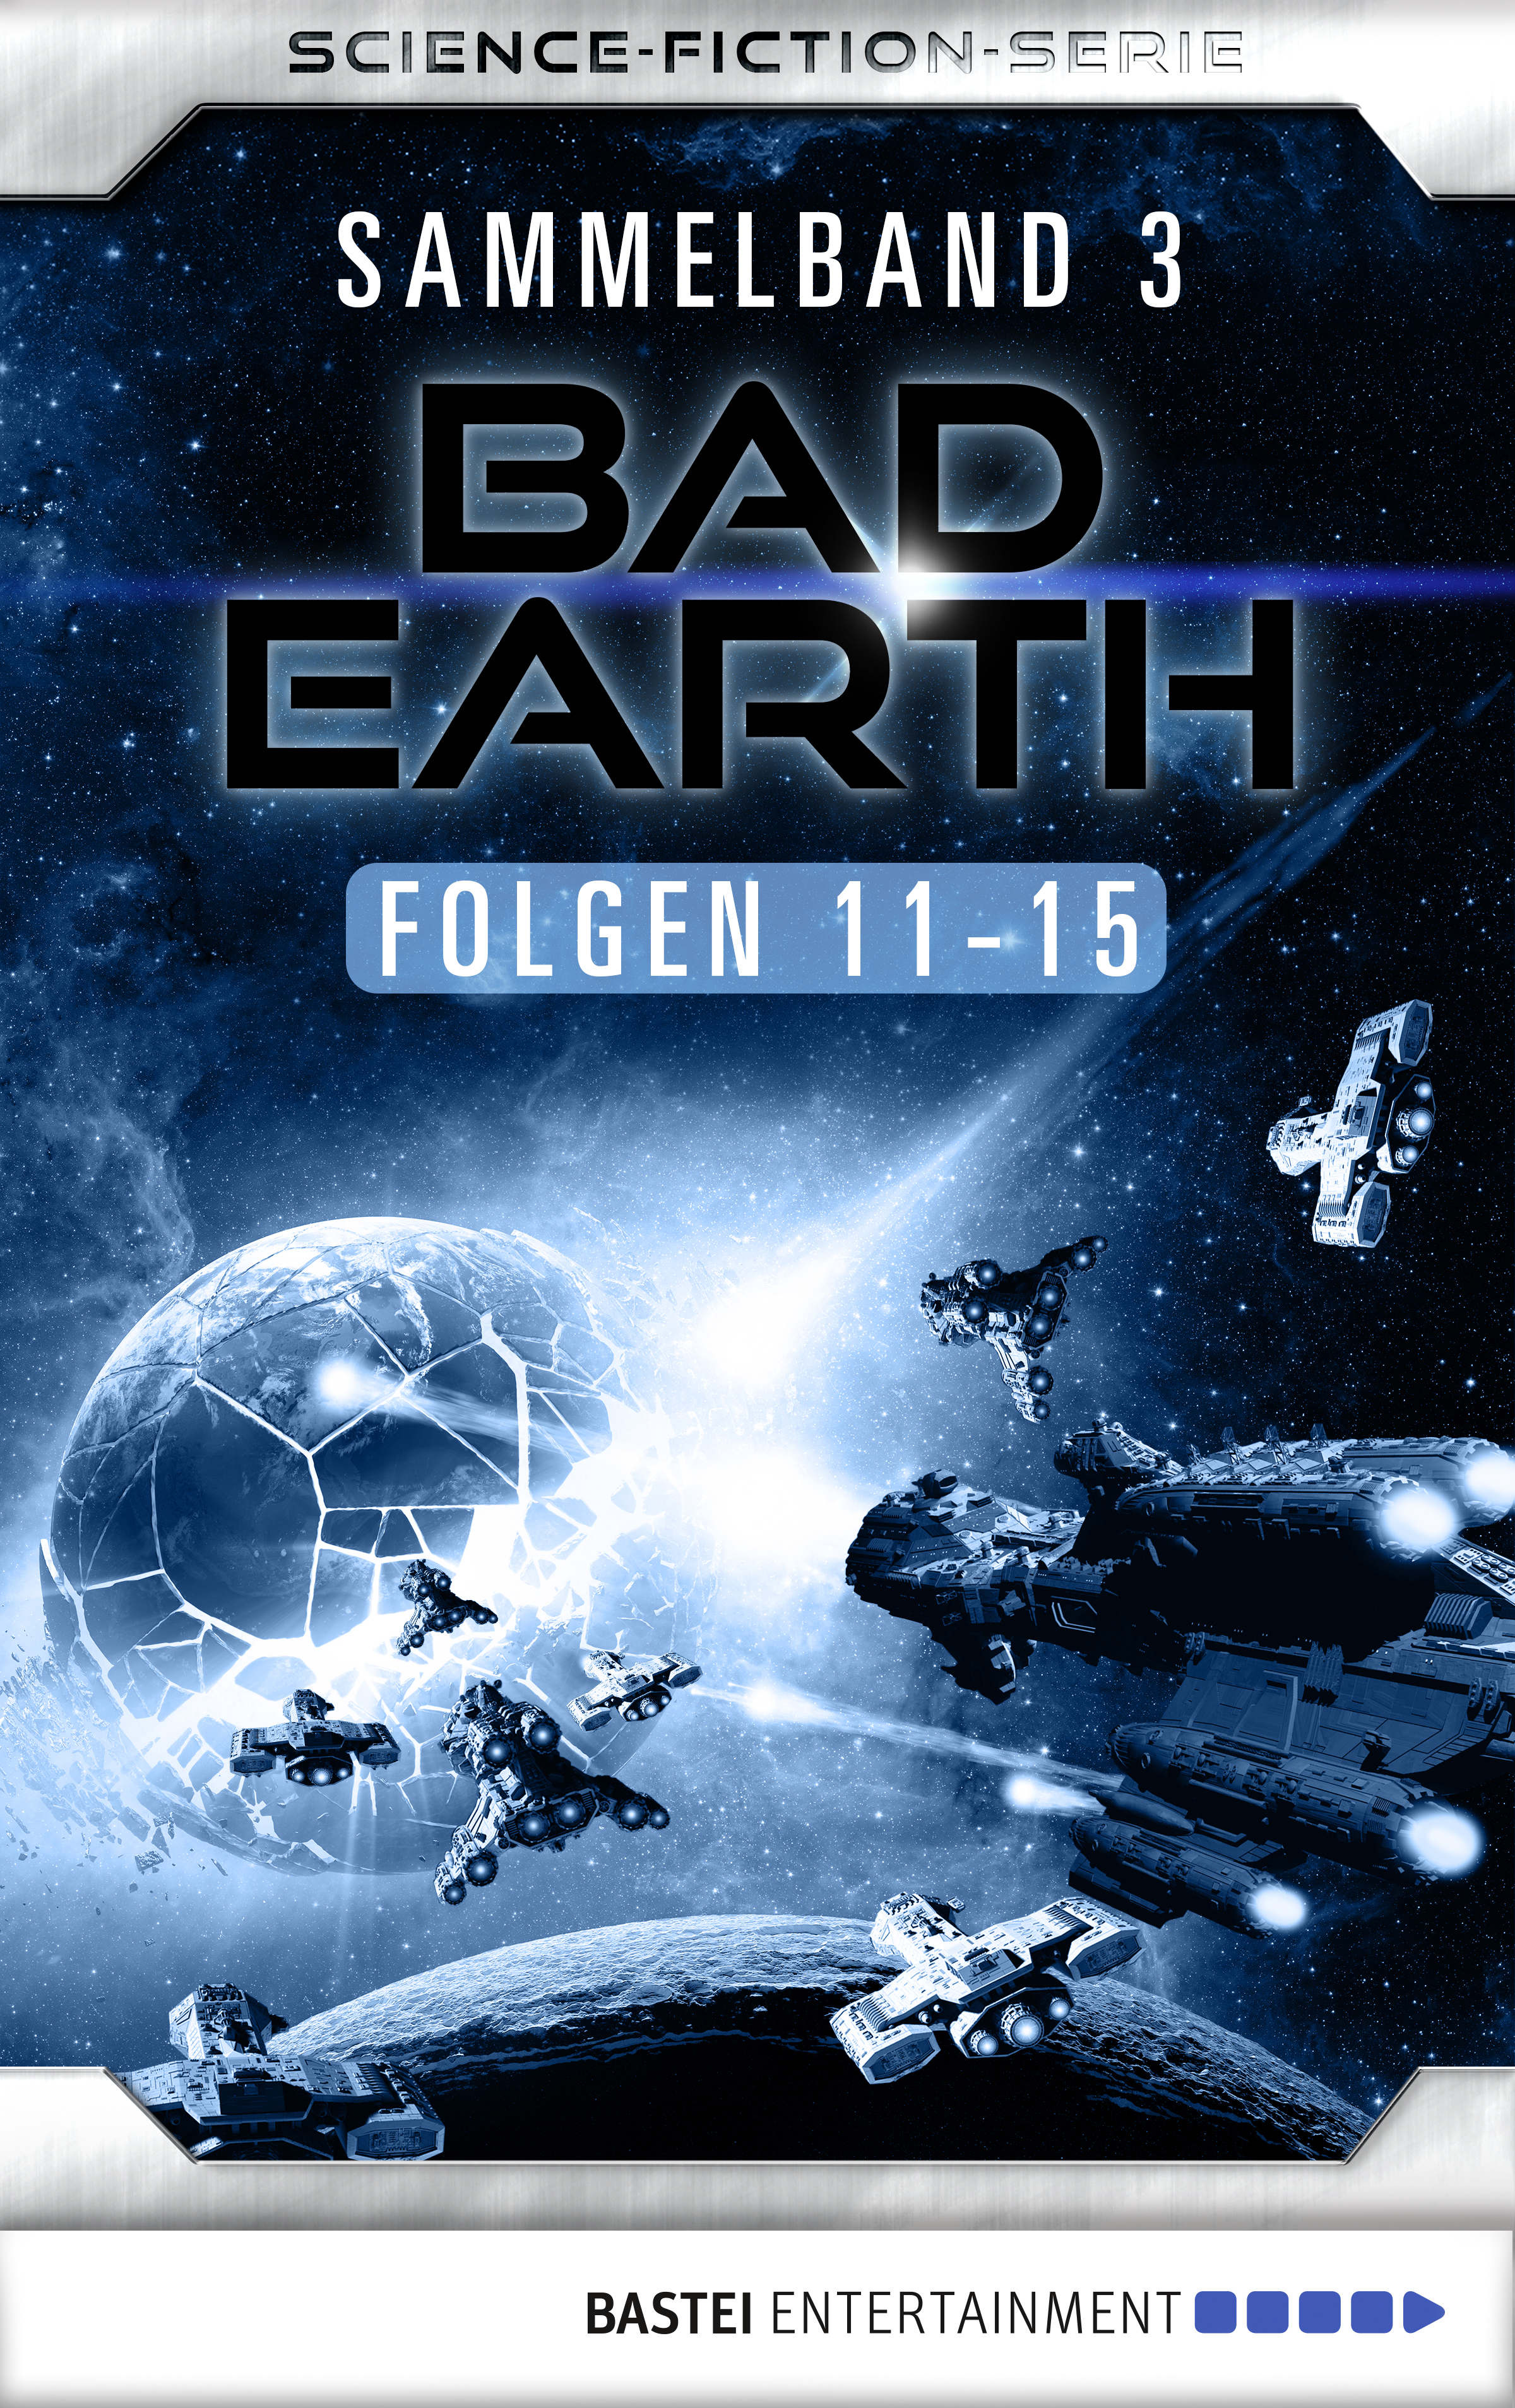 Bad Earth Sammelband 3 - Science-Fiction-Serie